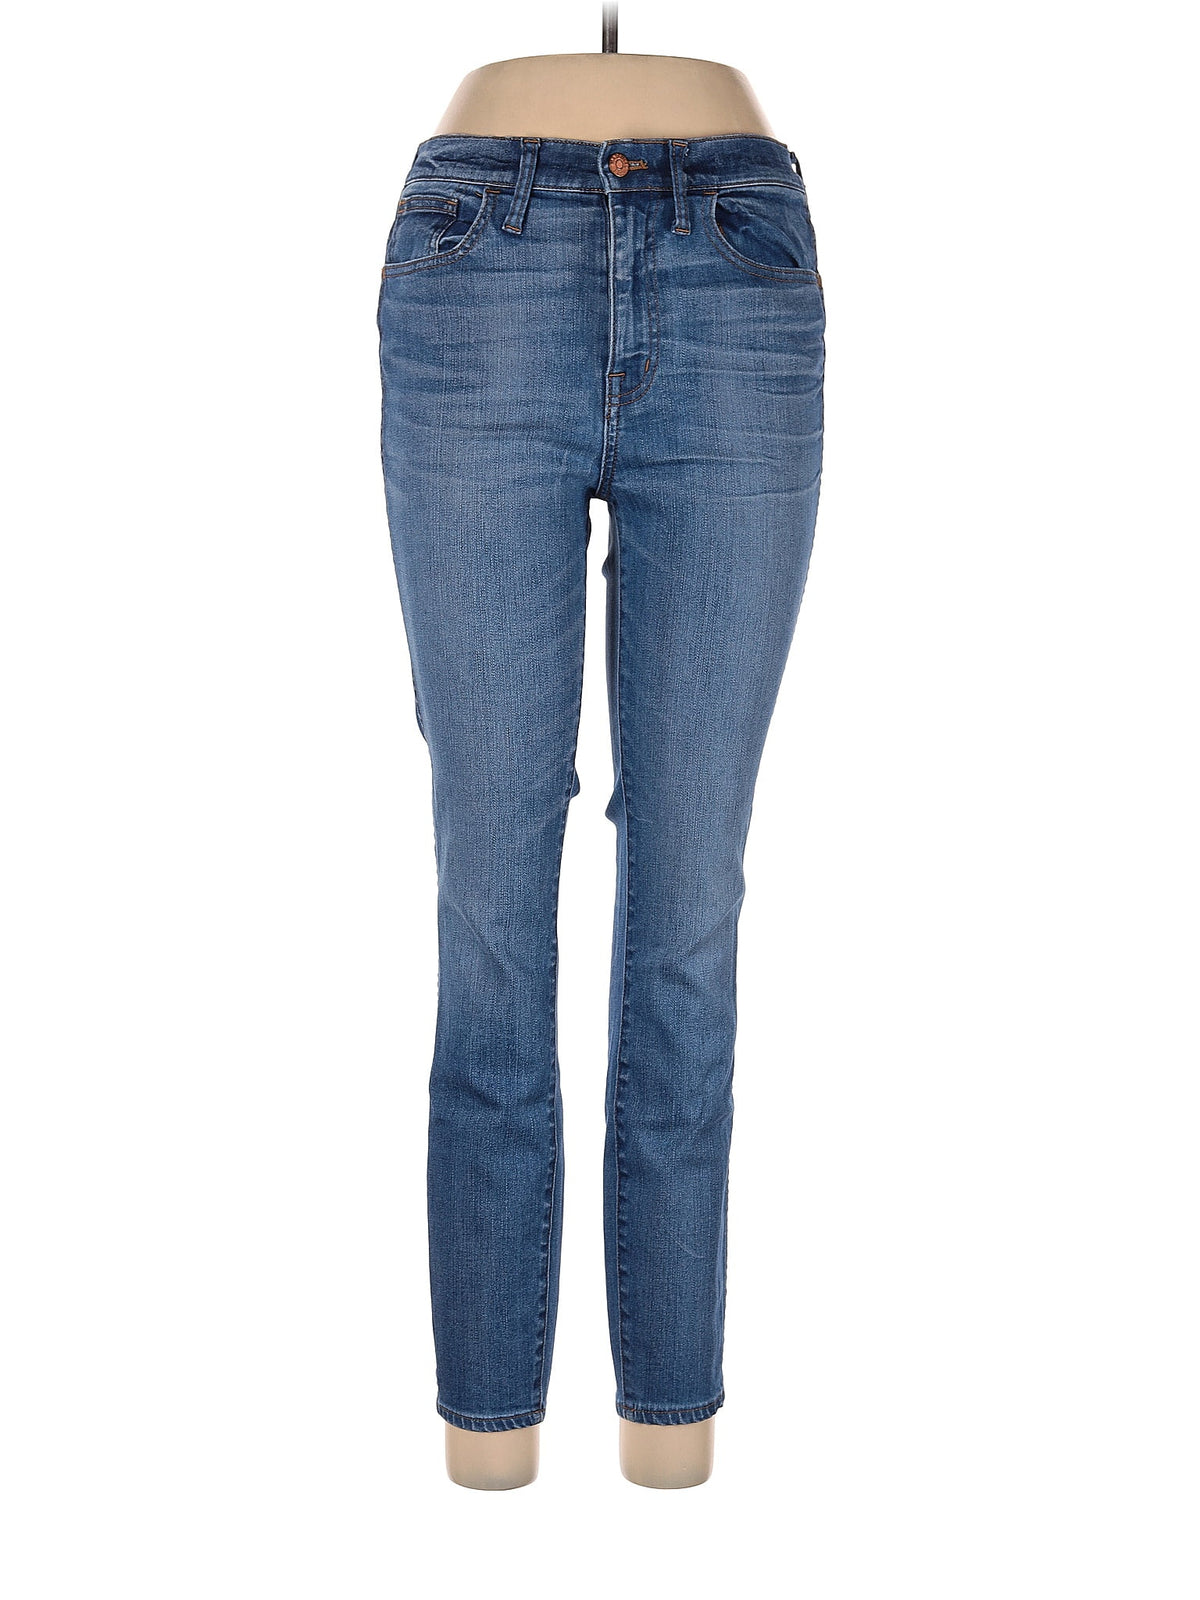 Mid-Rise Skinny 10" High-Rise Skinny Jeans In Rosedale in Medium Wash waist size - 29